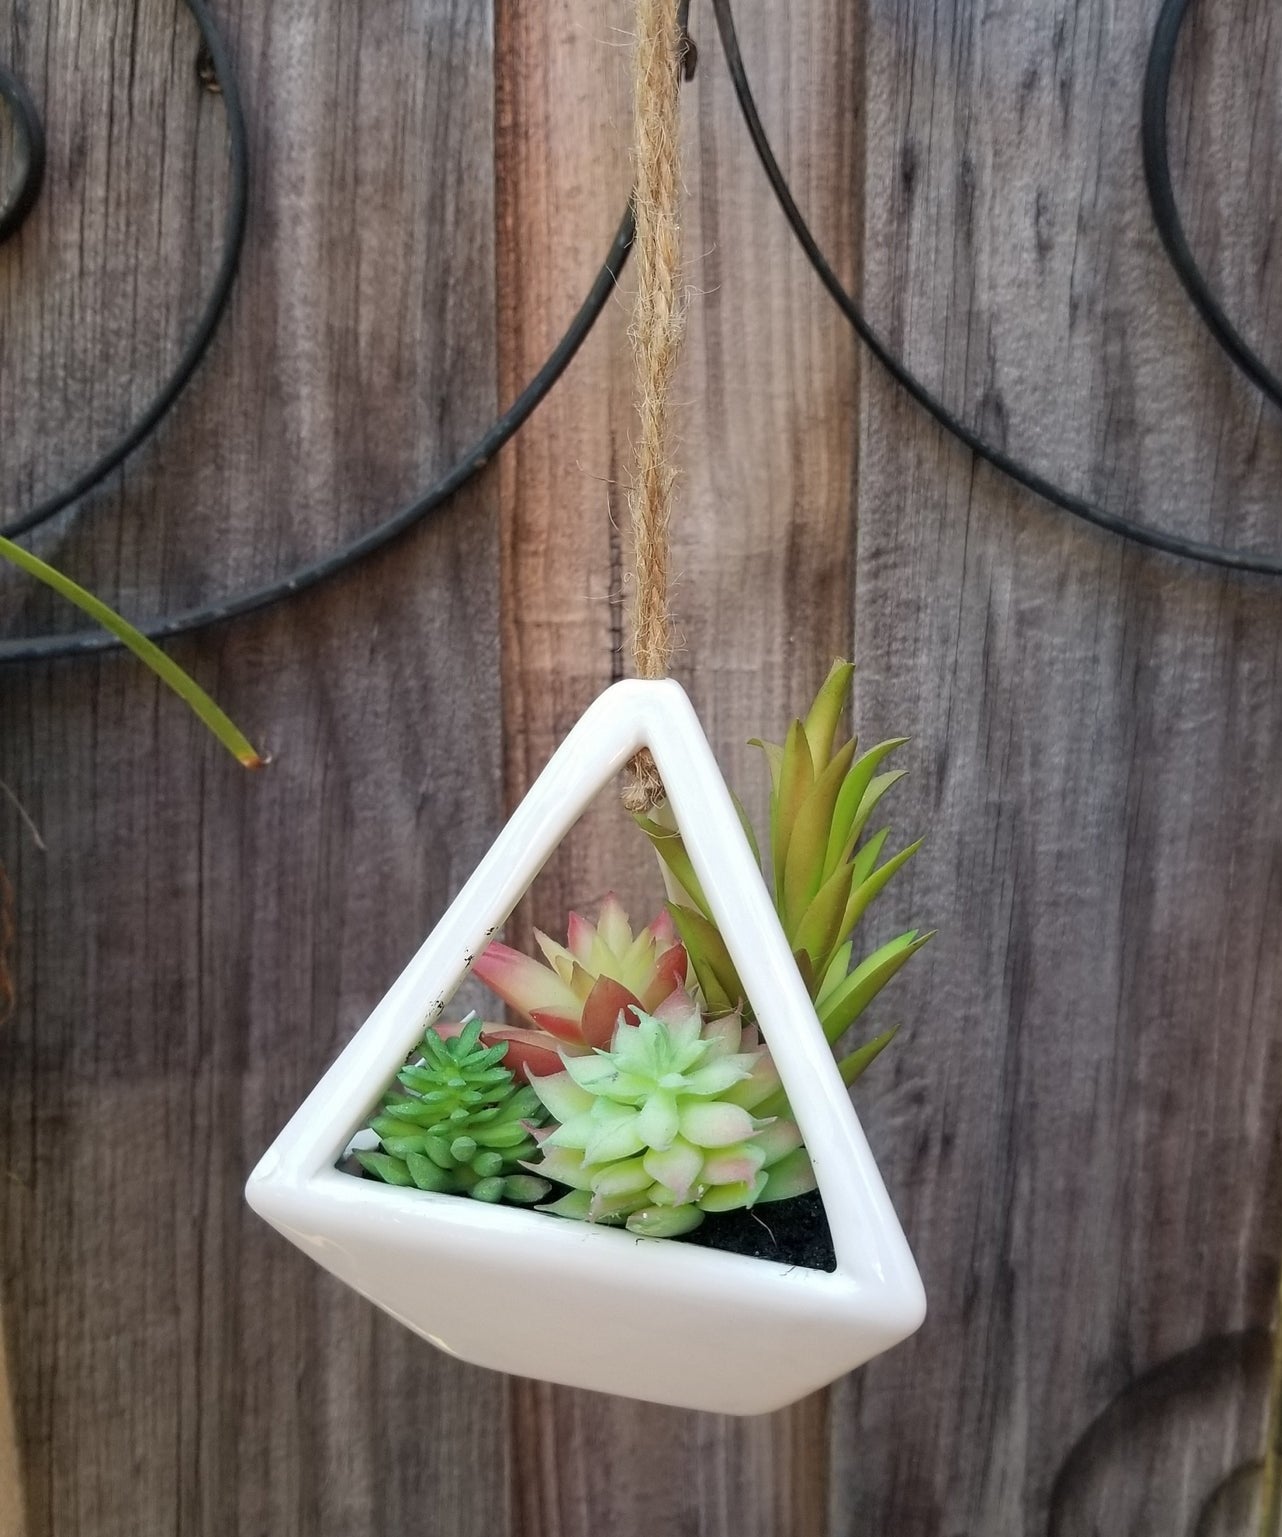 The fake succulent arrangement in a white geometric hanging pot